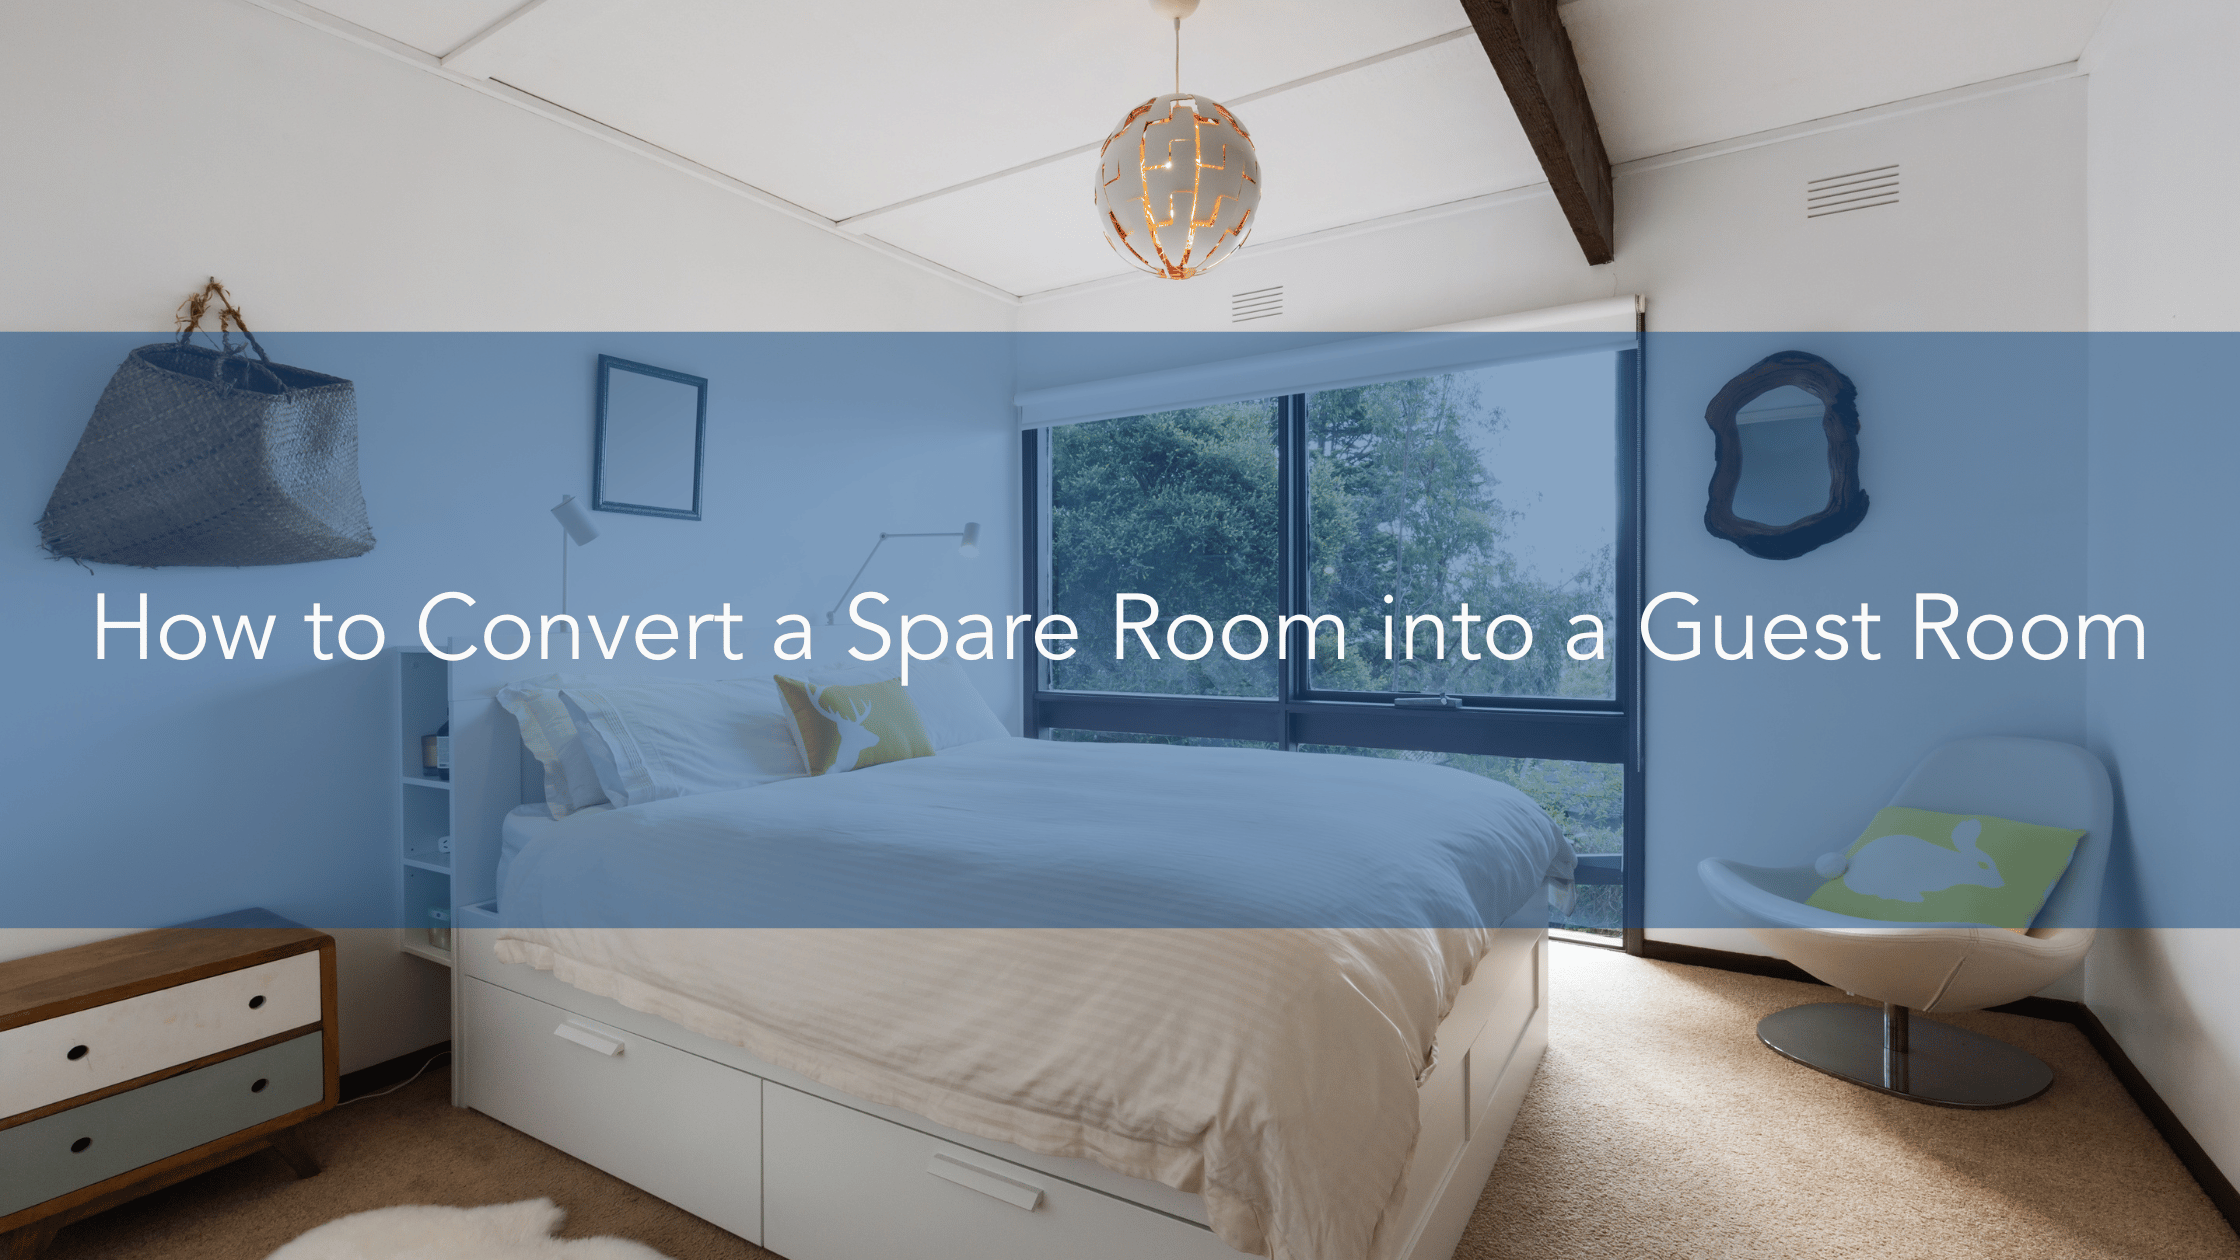 How to Convert a Spare Room into a Guest Room